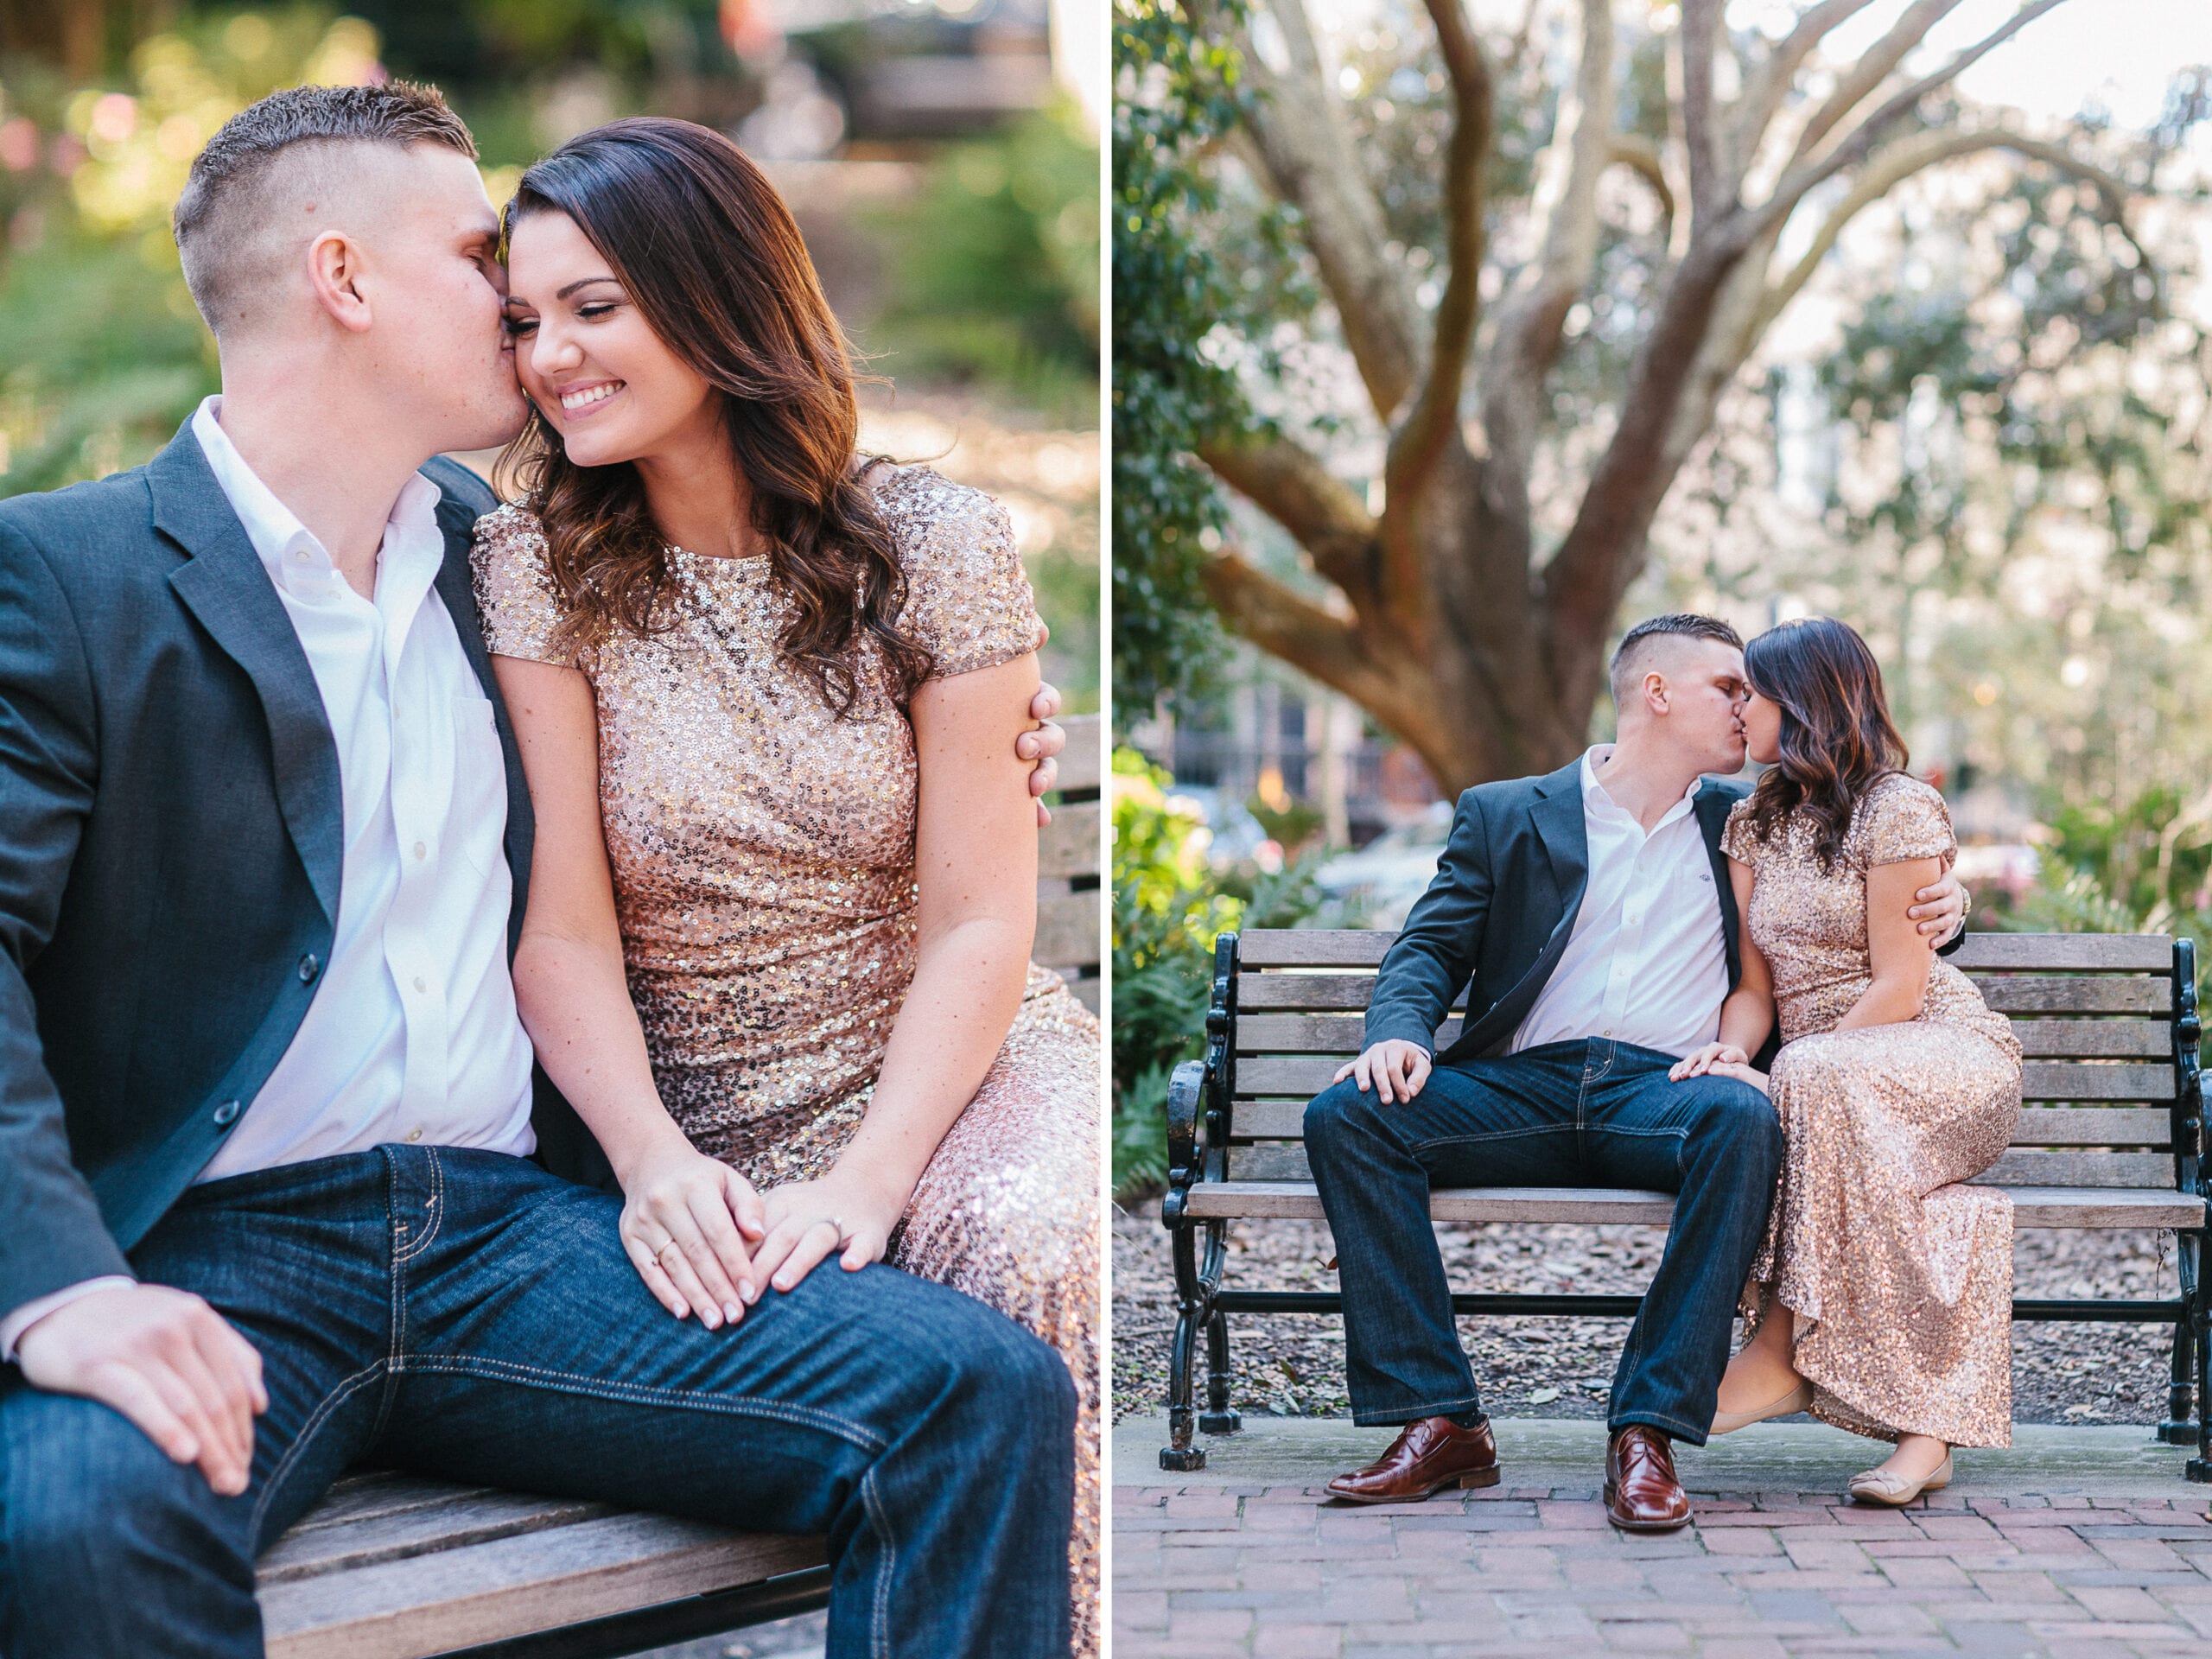 NYE Inspired Engagement Session in Downtown Savannah Georgia by Lauren Myers Photography